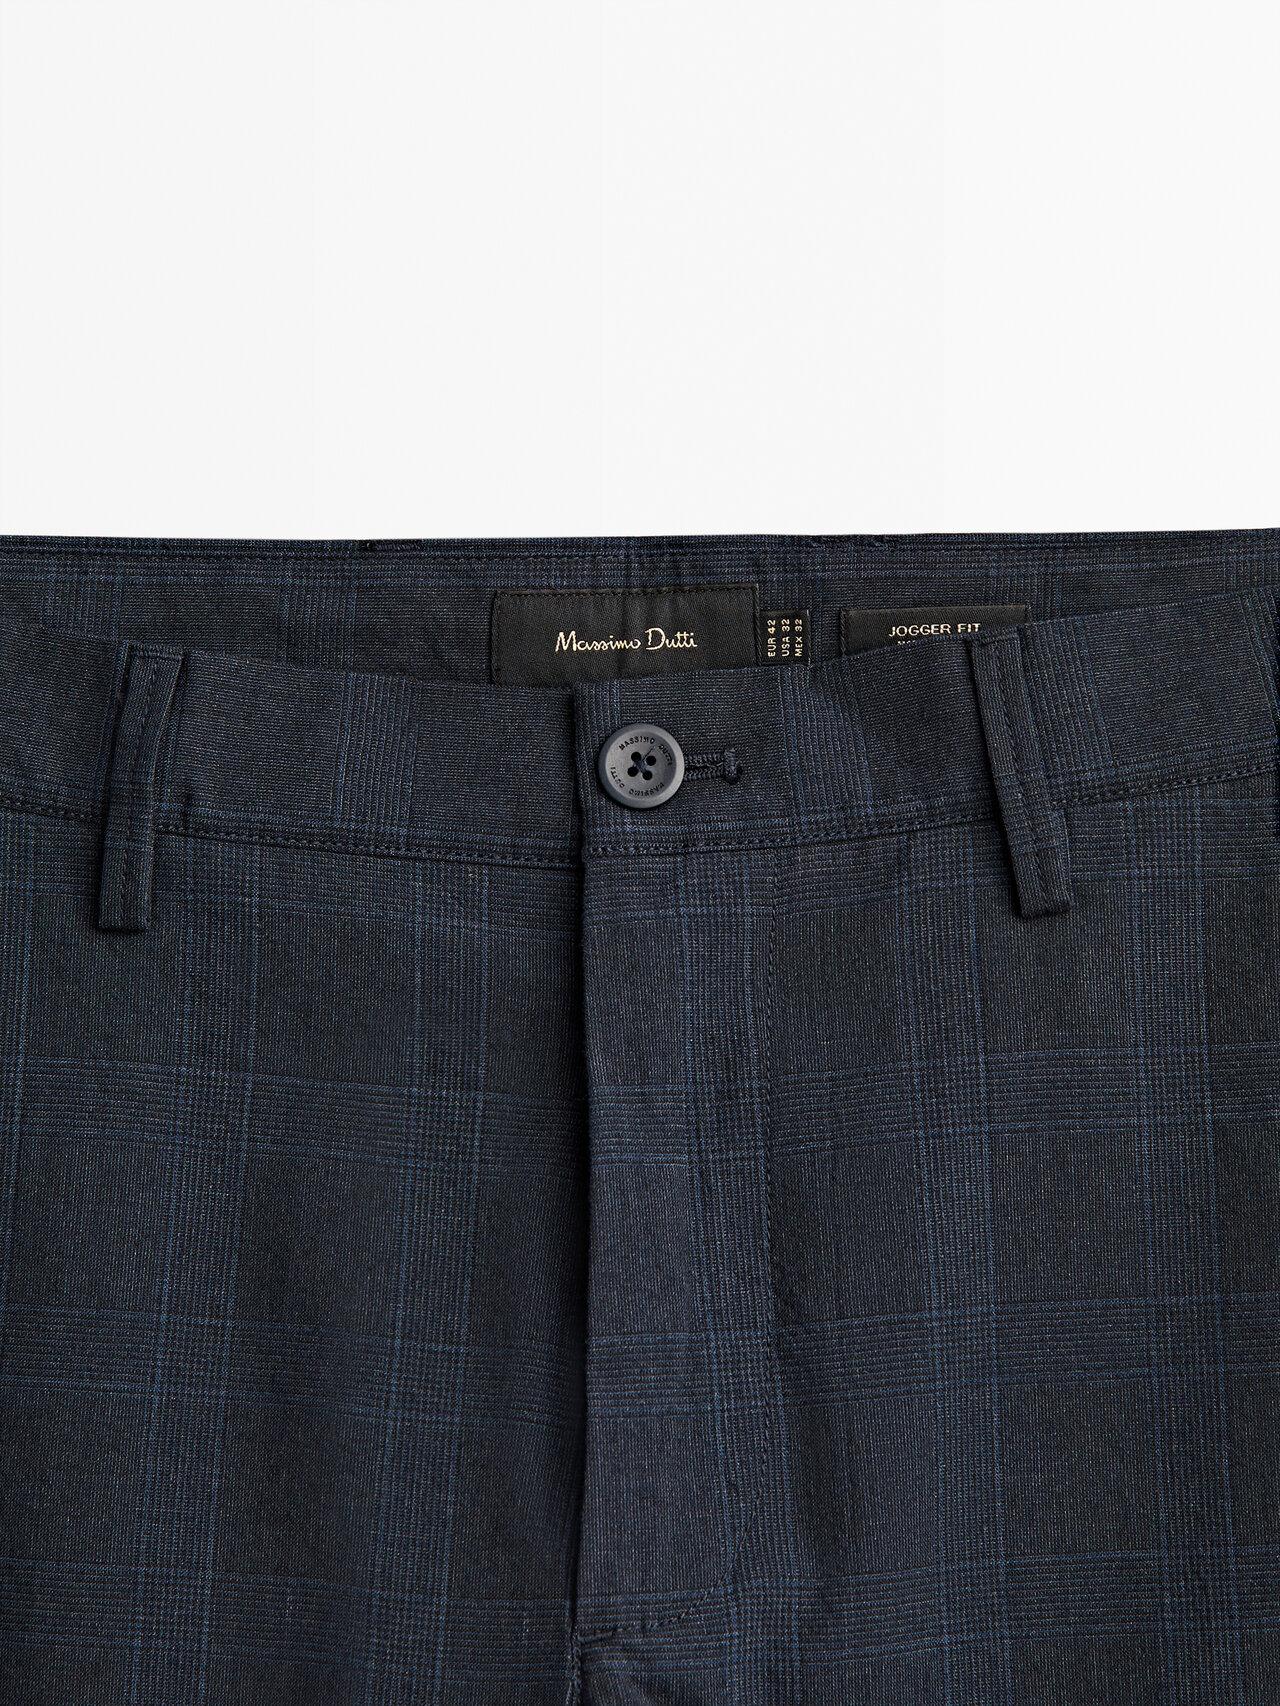 MASSIMO DUTTI Jogging Fit Check Chinos in Navy Blue (Blue) for Men | Lyst